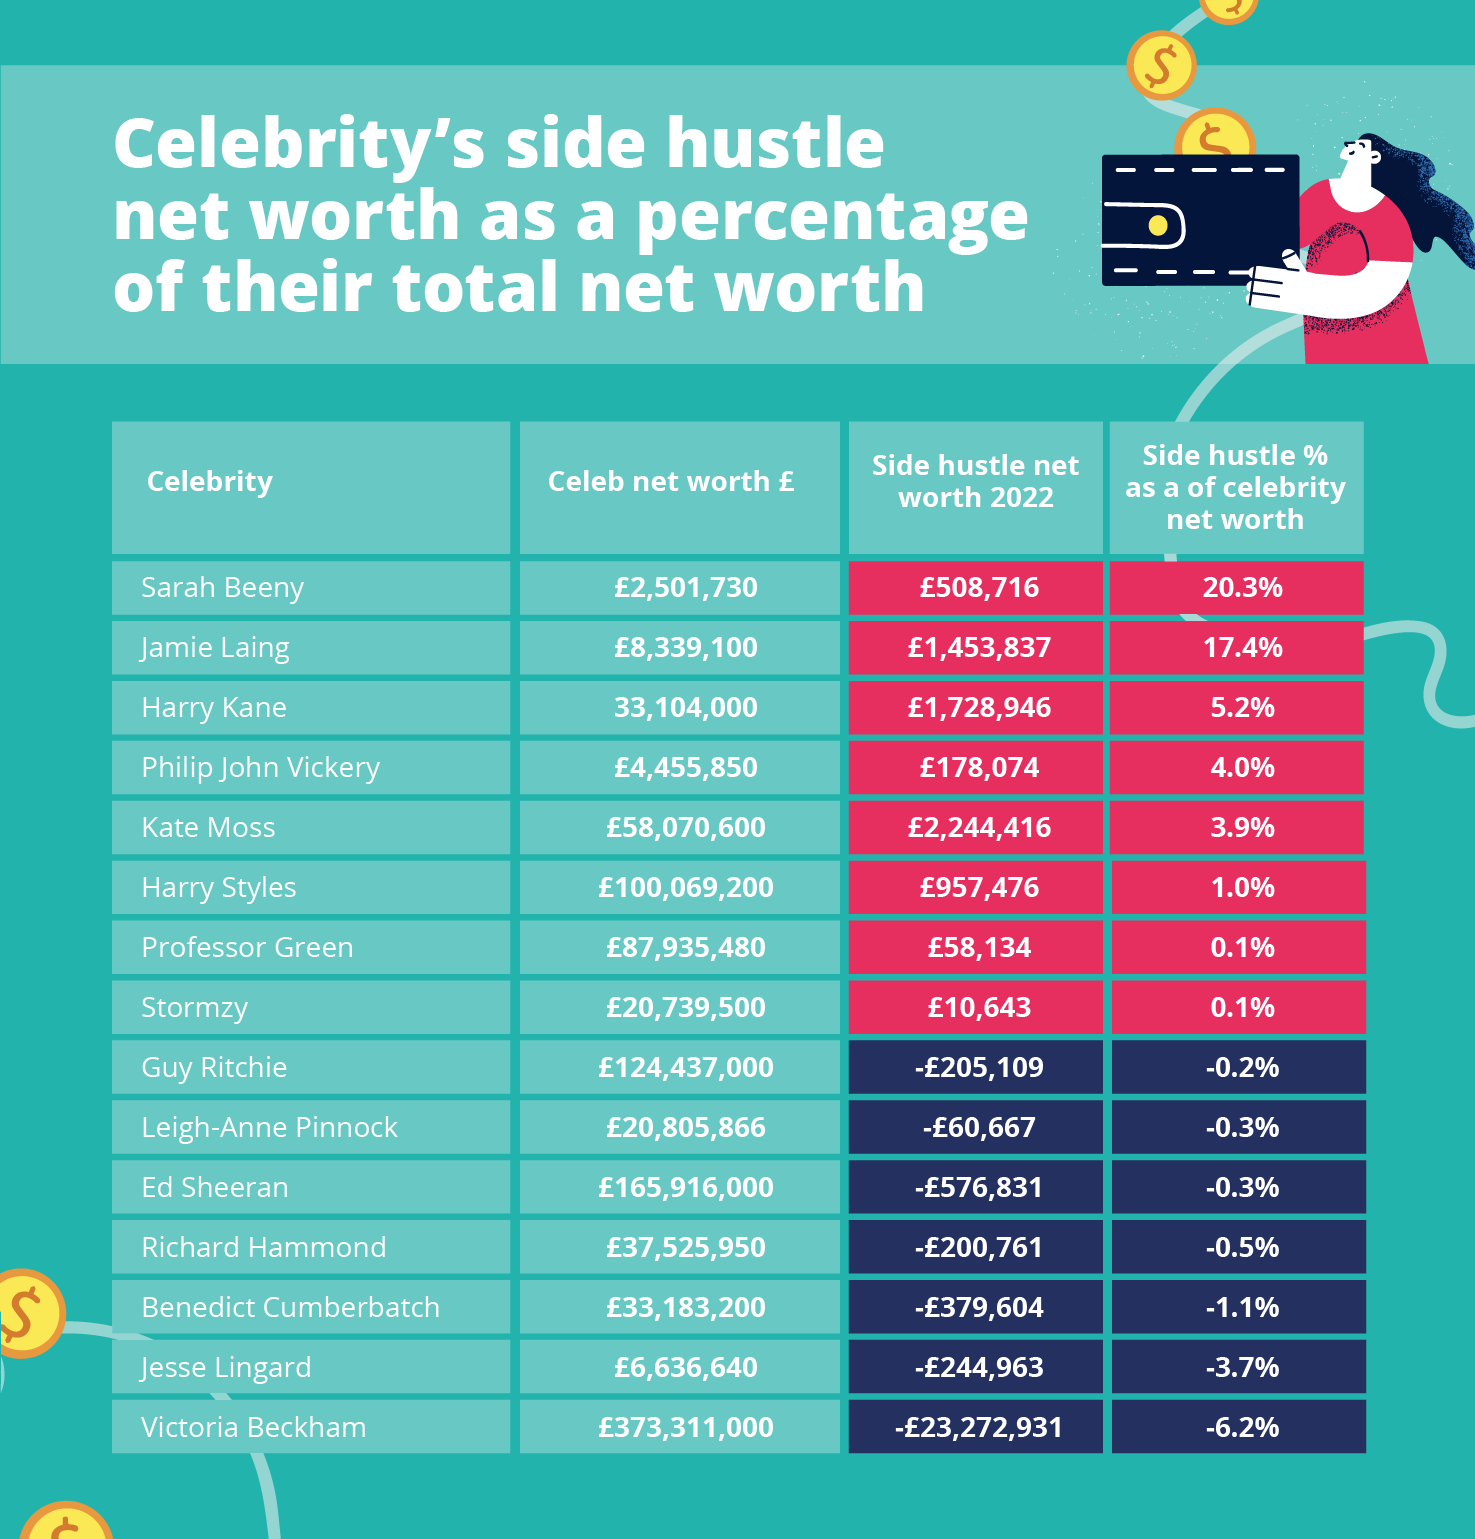 A table of results showing each celebrities' net worth as a percentage of their total net worth